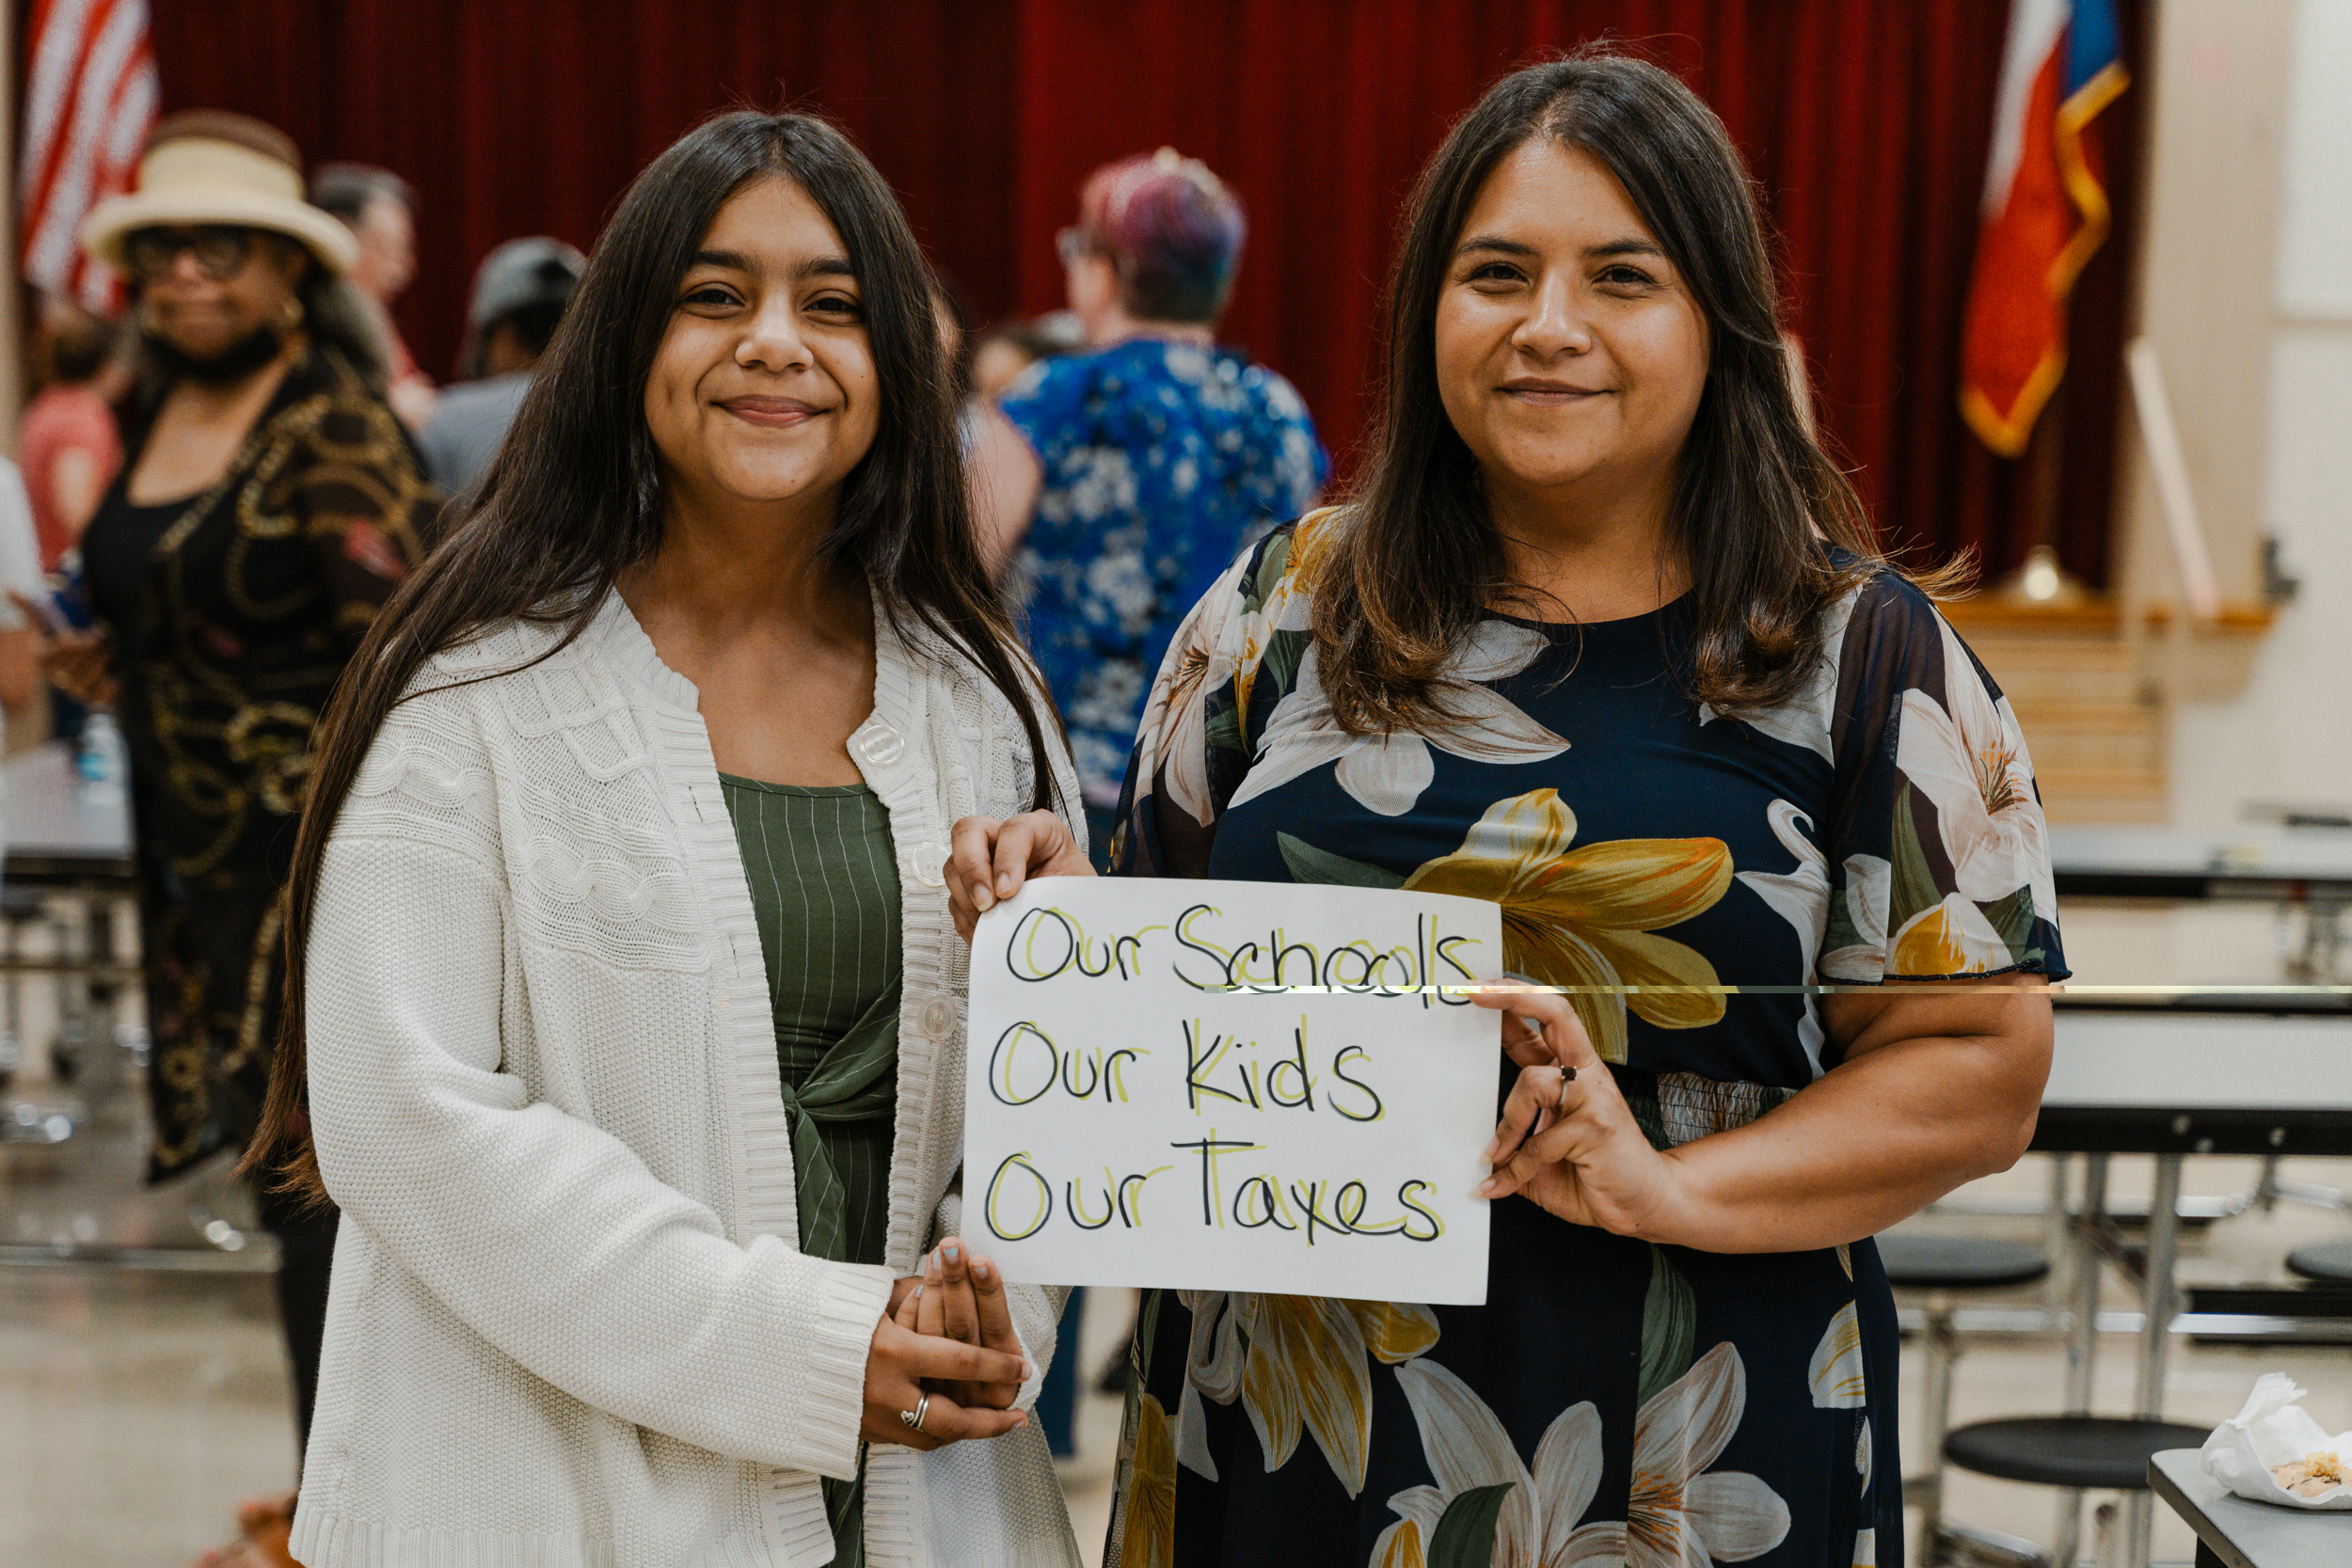 Jessica Campos, right, and her daughter, Sofie, pose for a portrait at an HISD community meeting in Houston